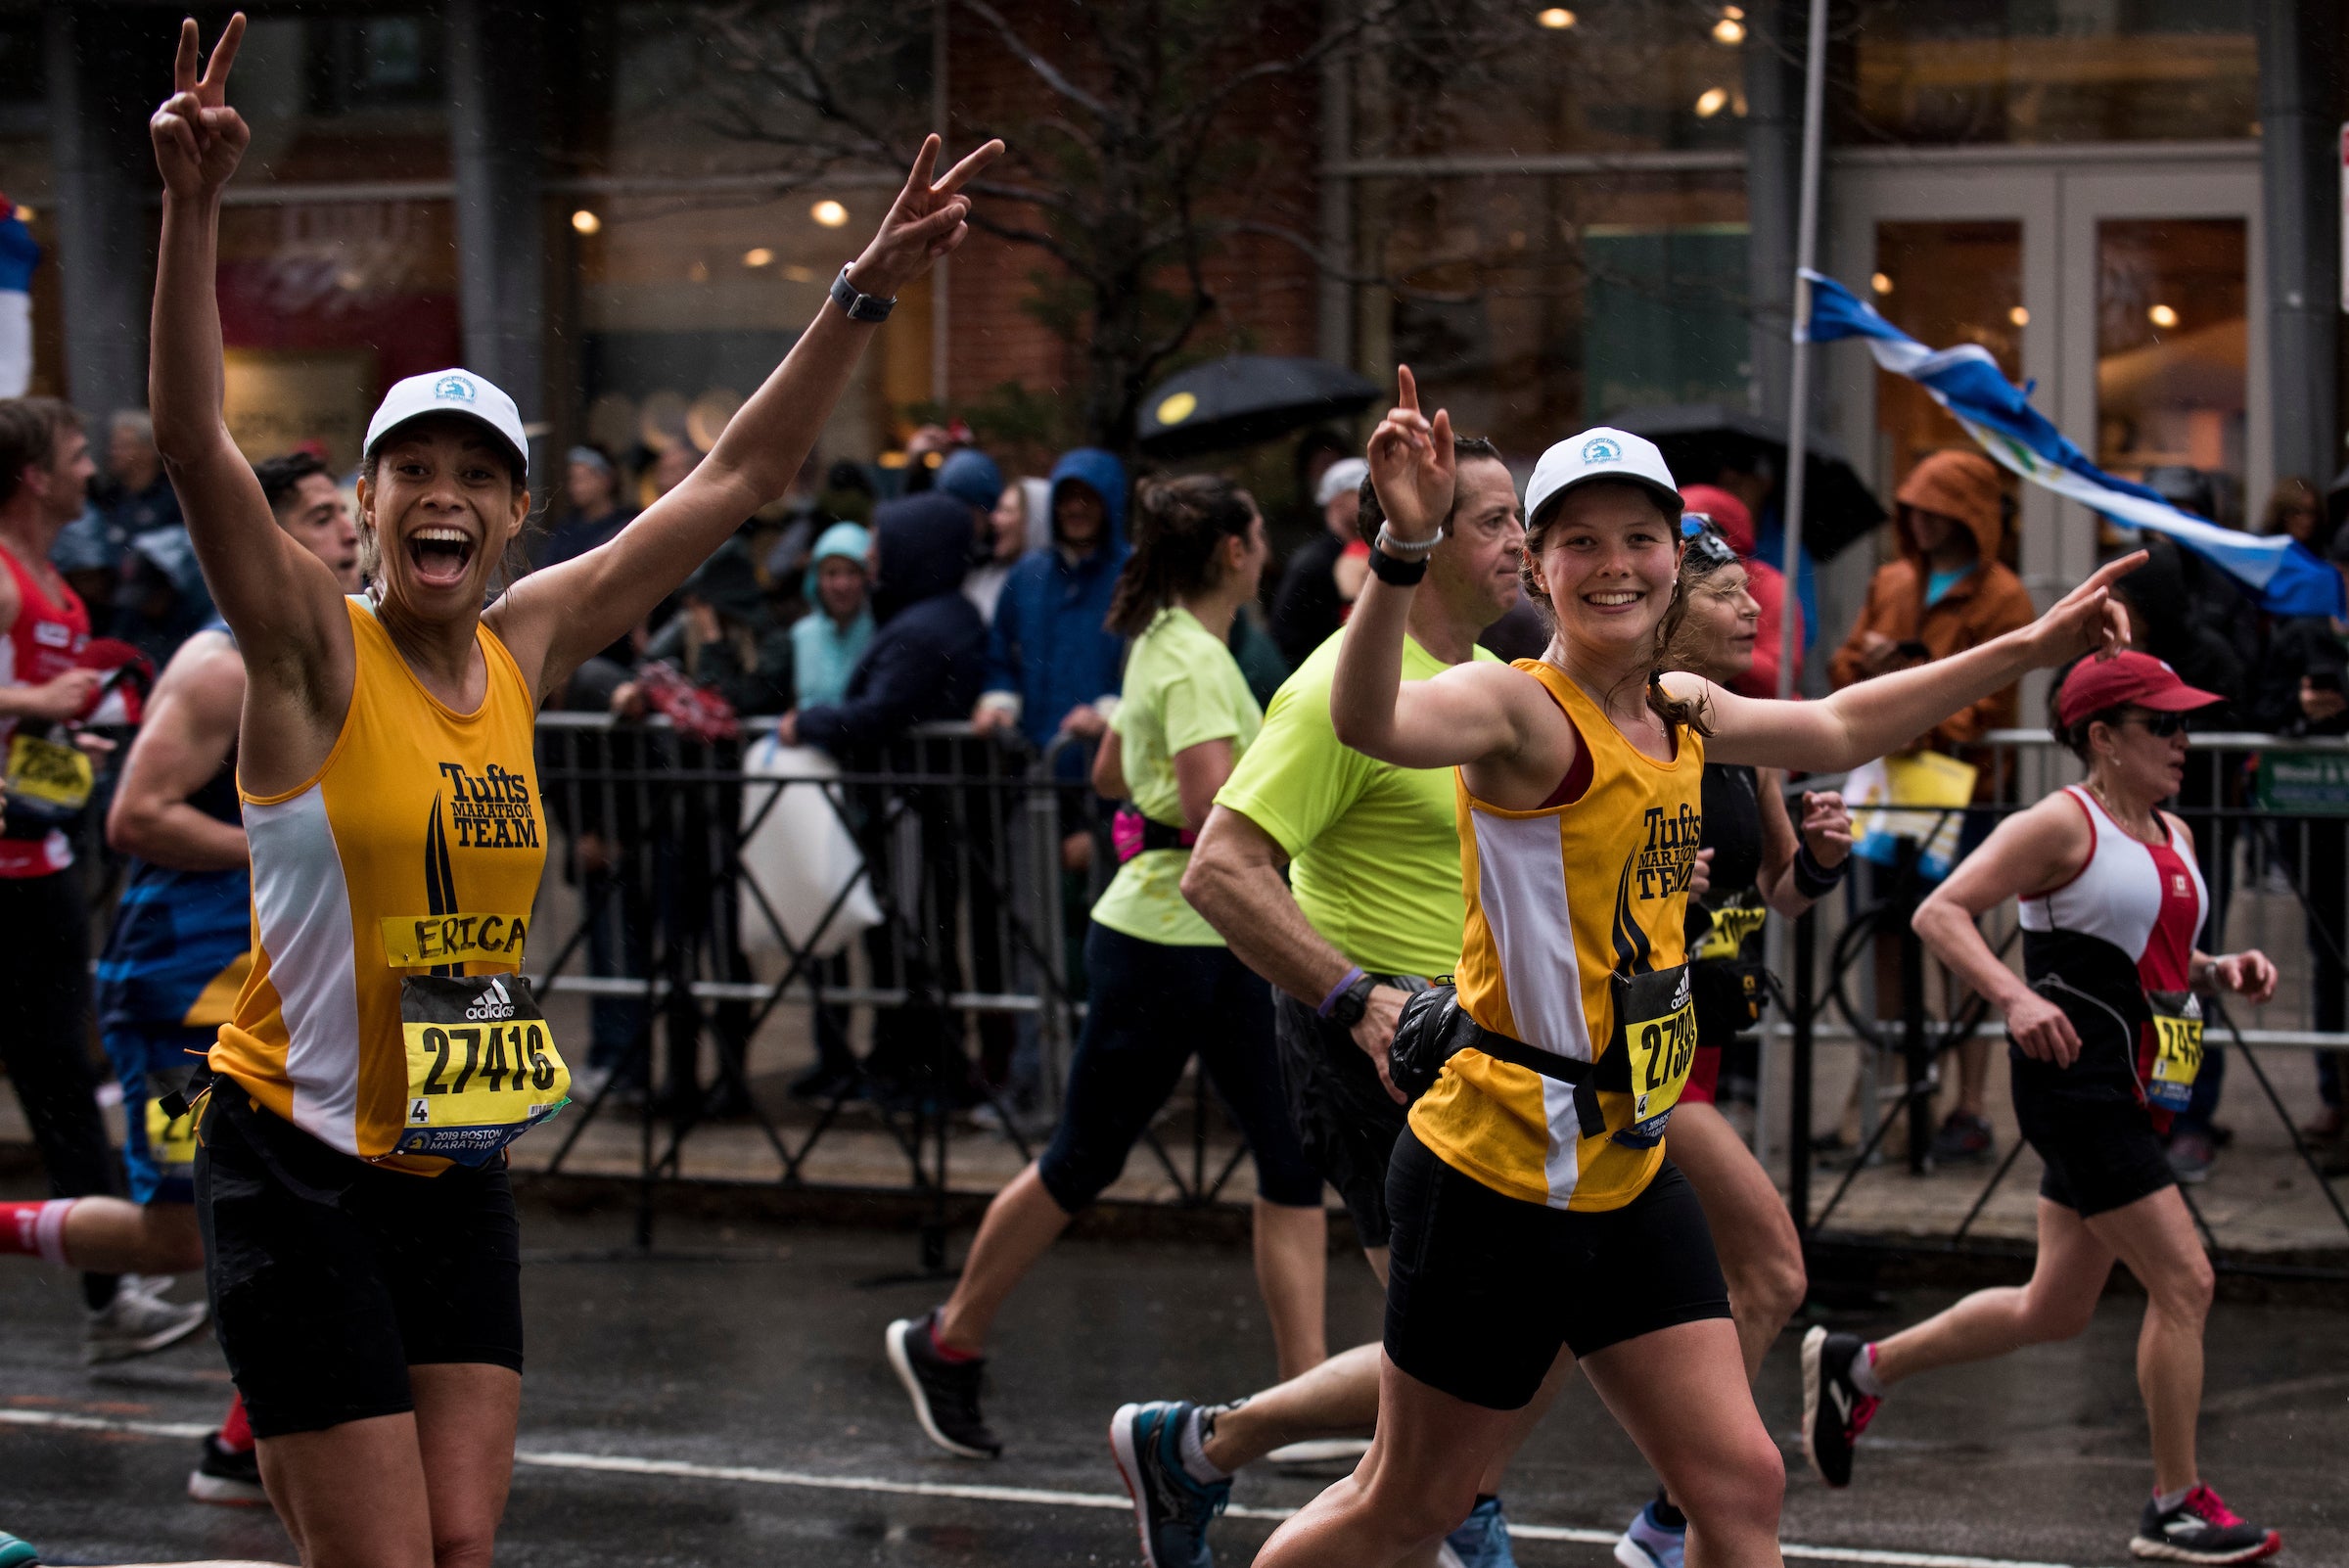 Erica Robles, A19 and Megan Kuhnle, A19, on the stretch of Boylston Ave to the finish line (Alonso Nichols/Tufts)